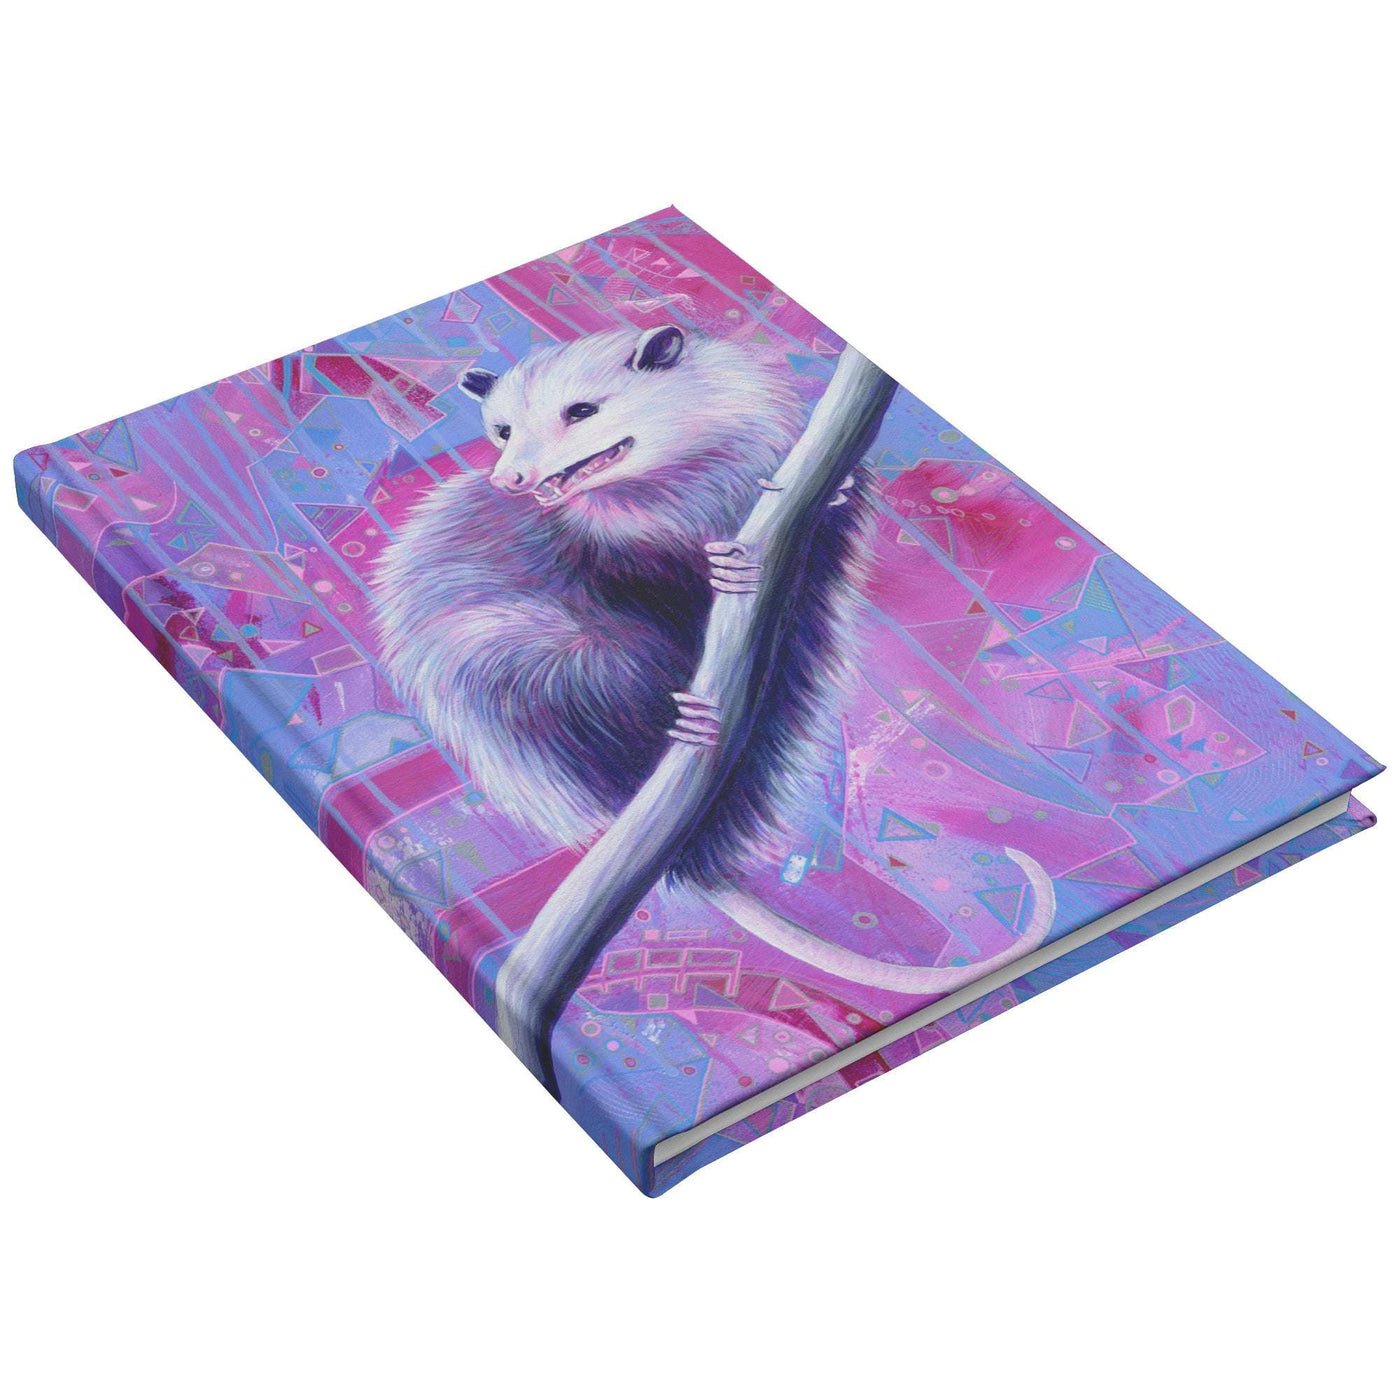 A colorful Opossum Journal cover featuring a whimsical illustration of a possum perched on a branch against a vibrant, geometric background.